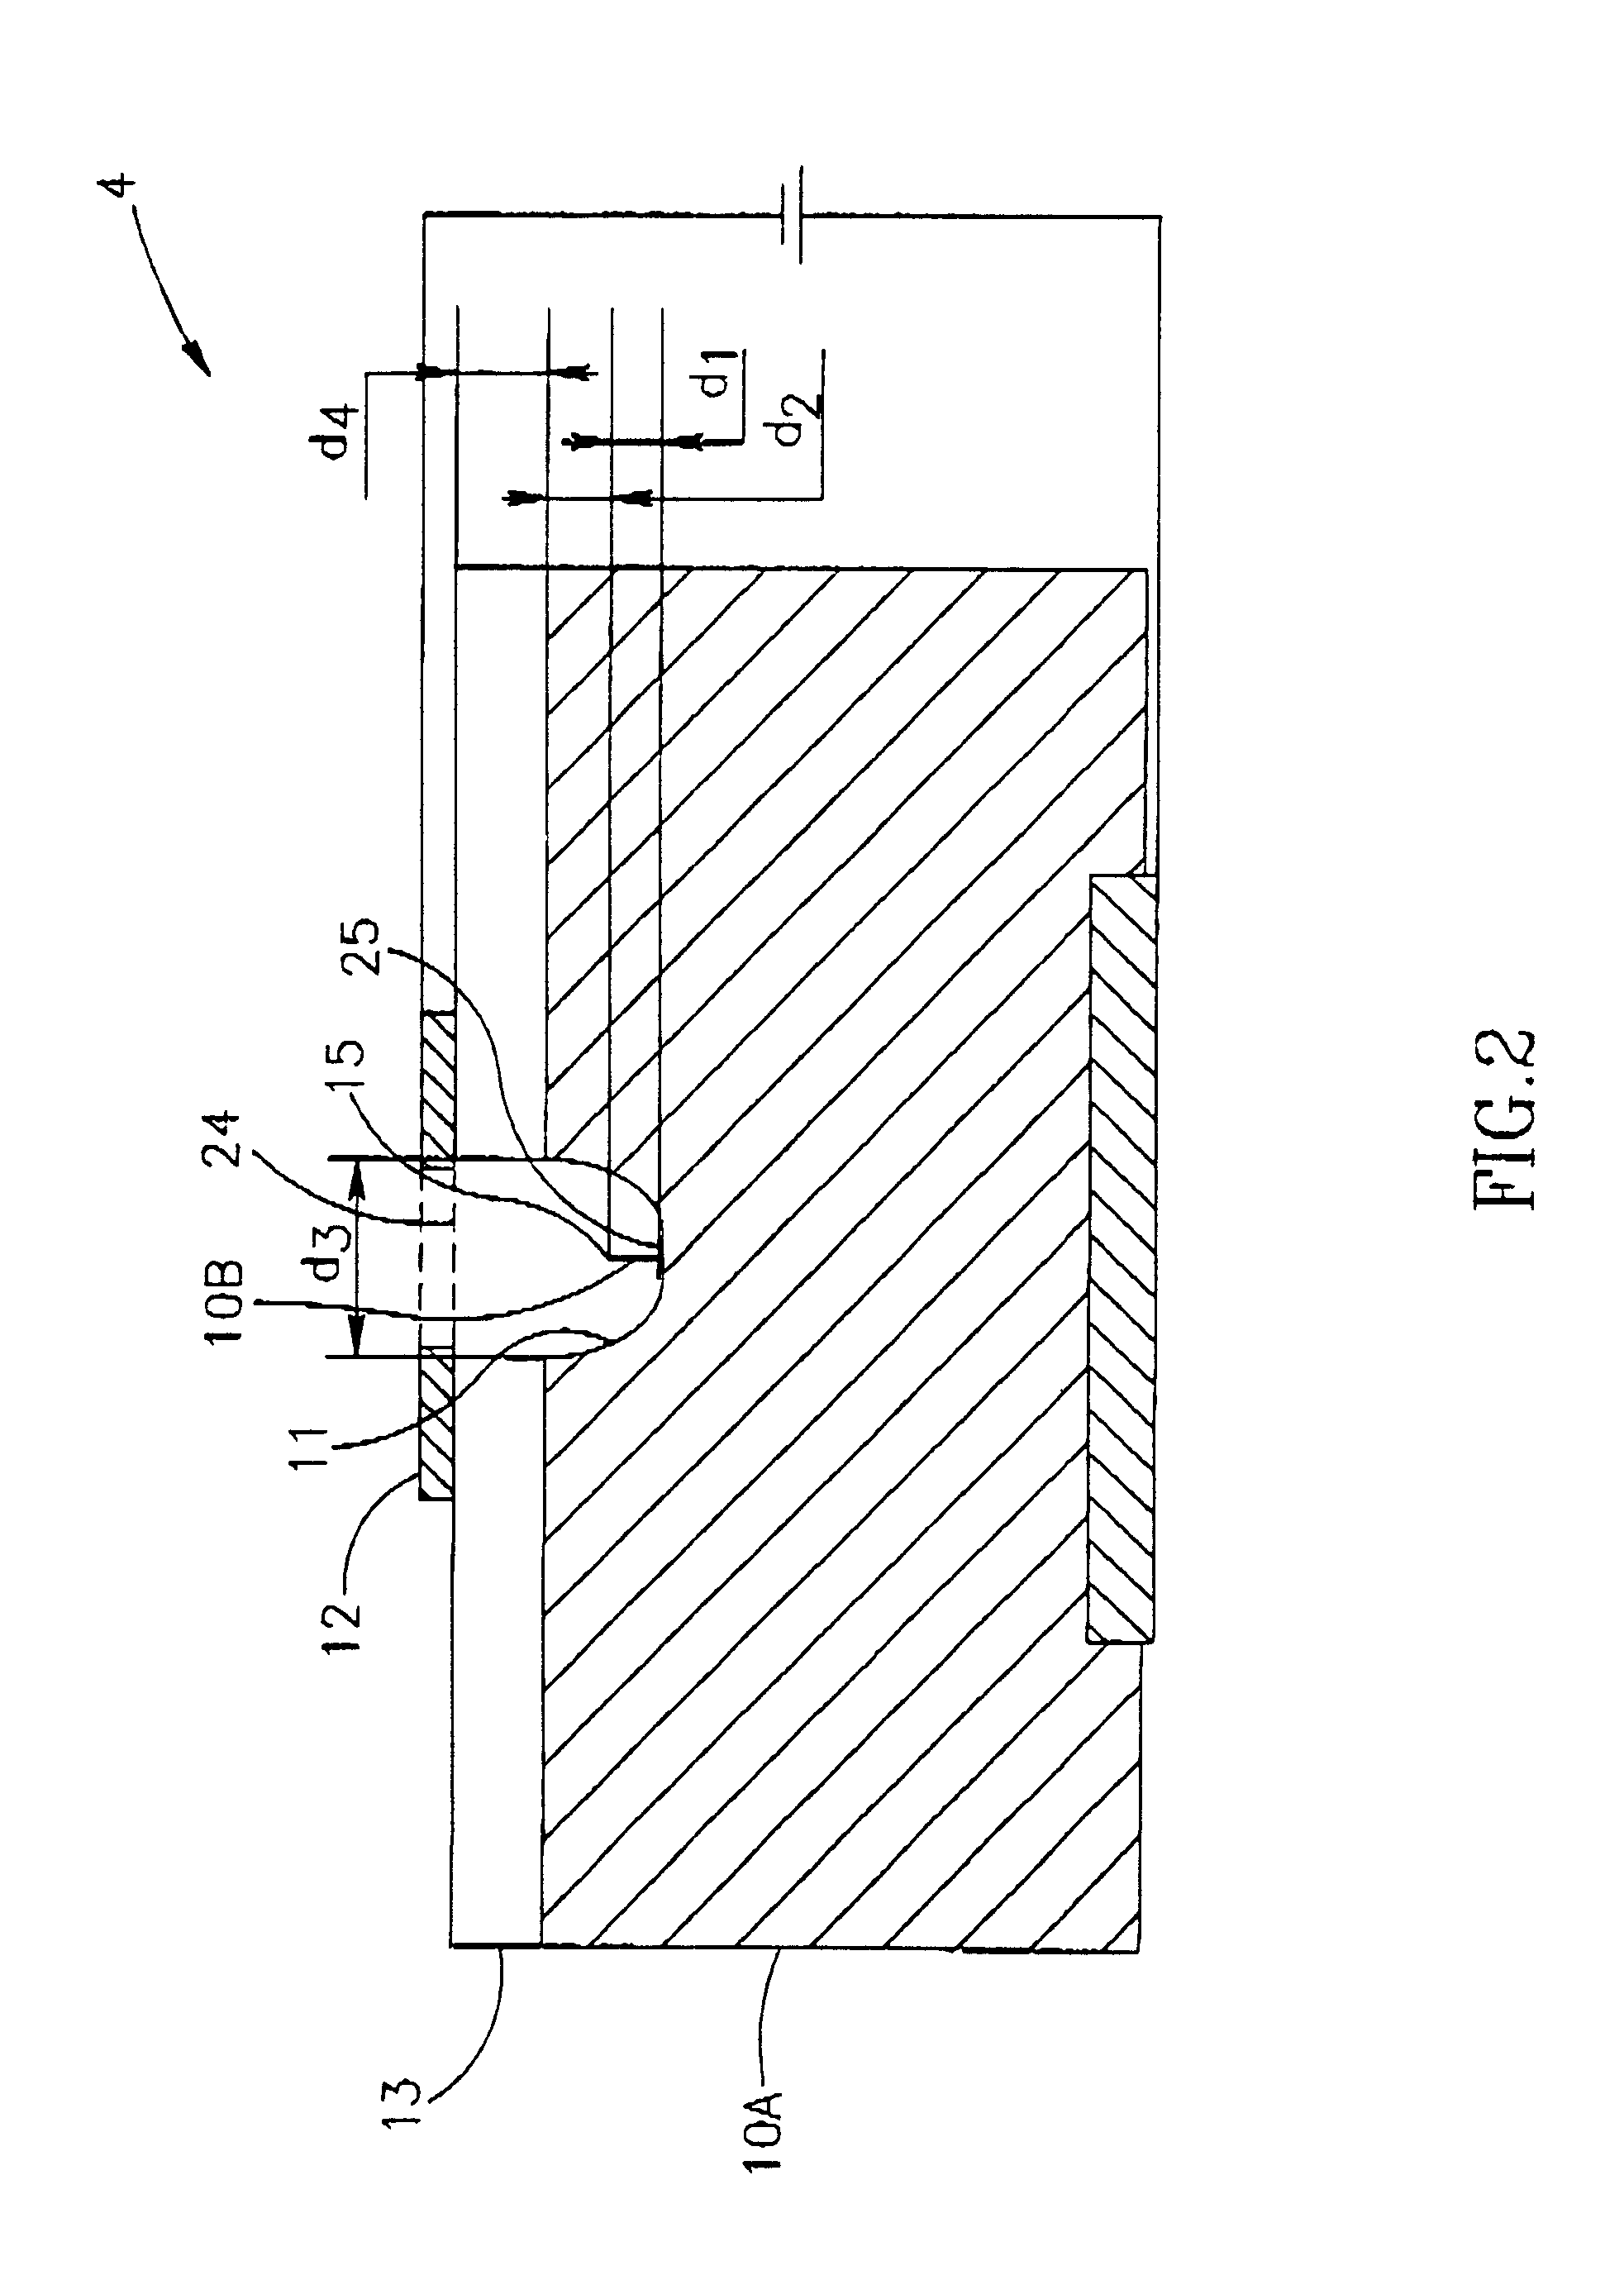 Nanotube-based electron emission device and systems using the same